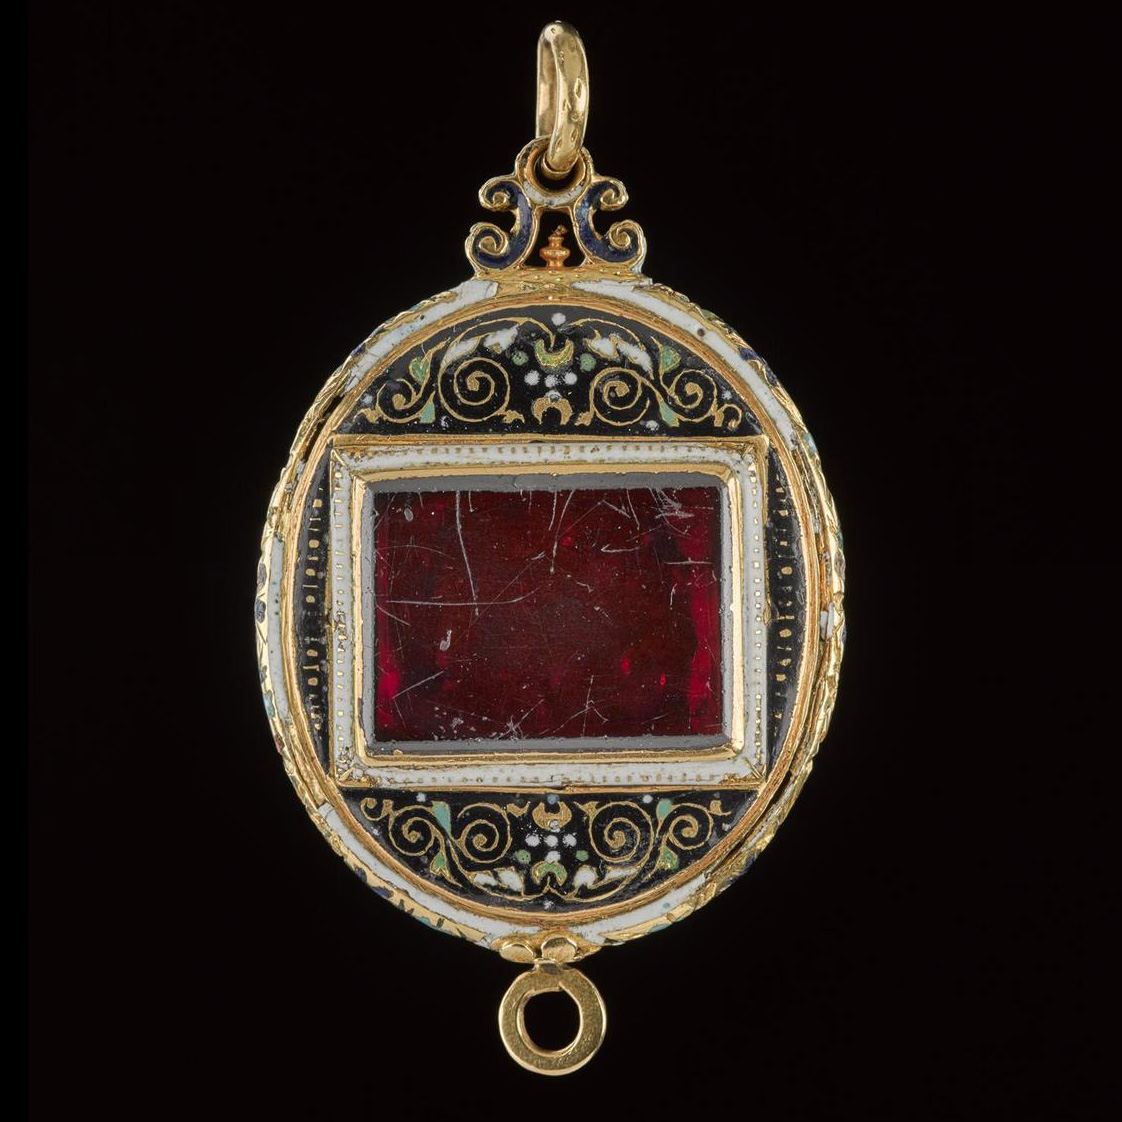 A mystery in the making: filming the Fettercairn Jewel | National ...